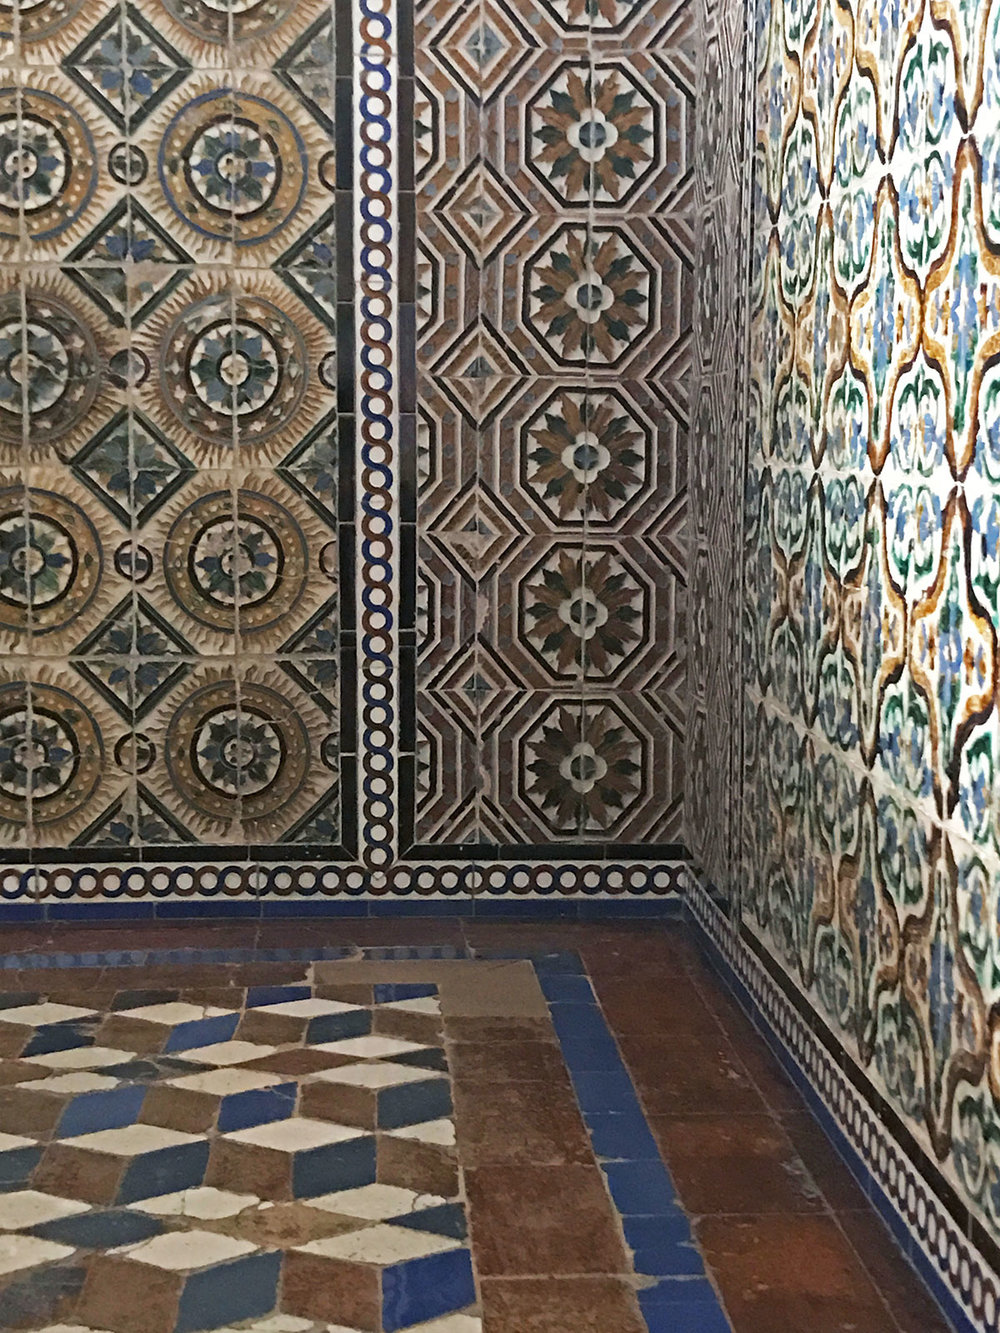 Beautiful, intricate tile work at the Alcázar in Seville, Spain